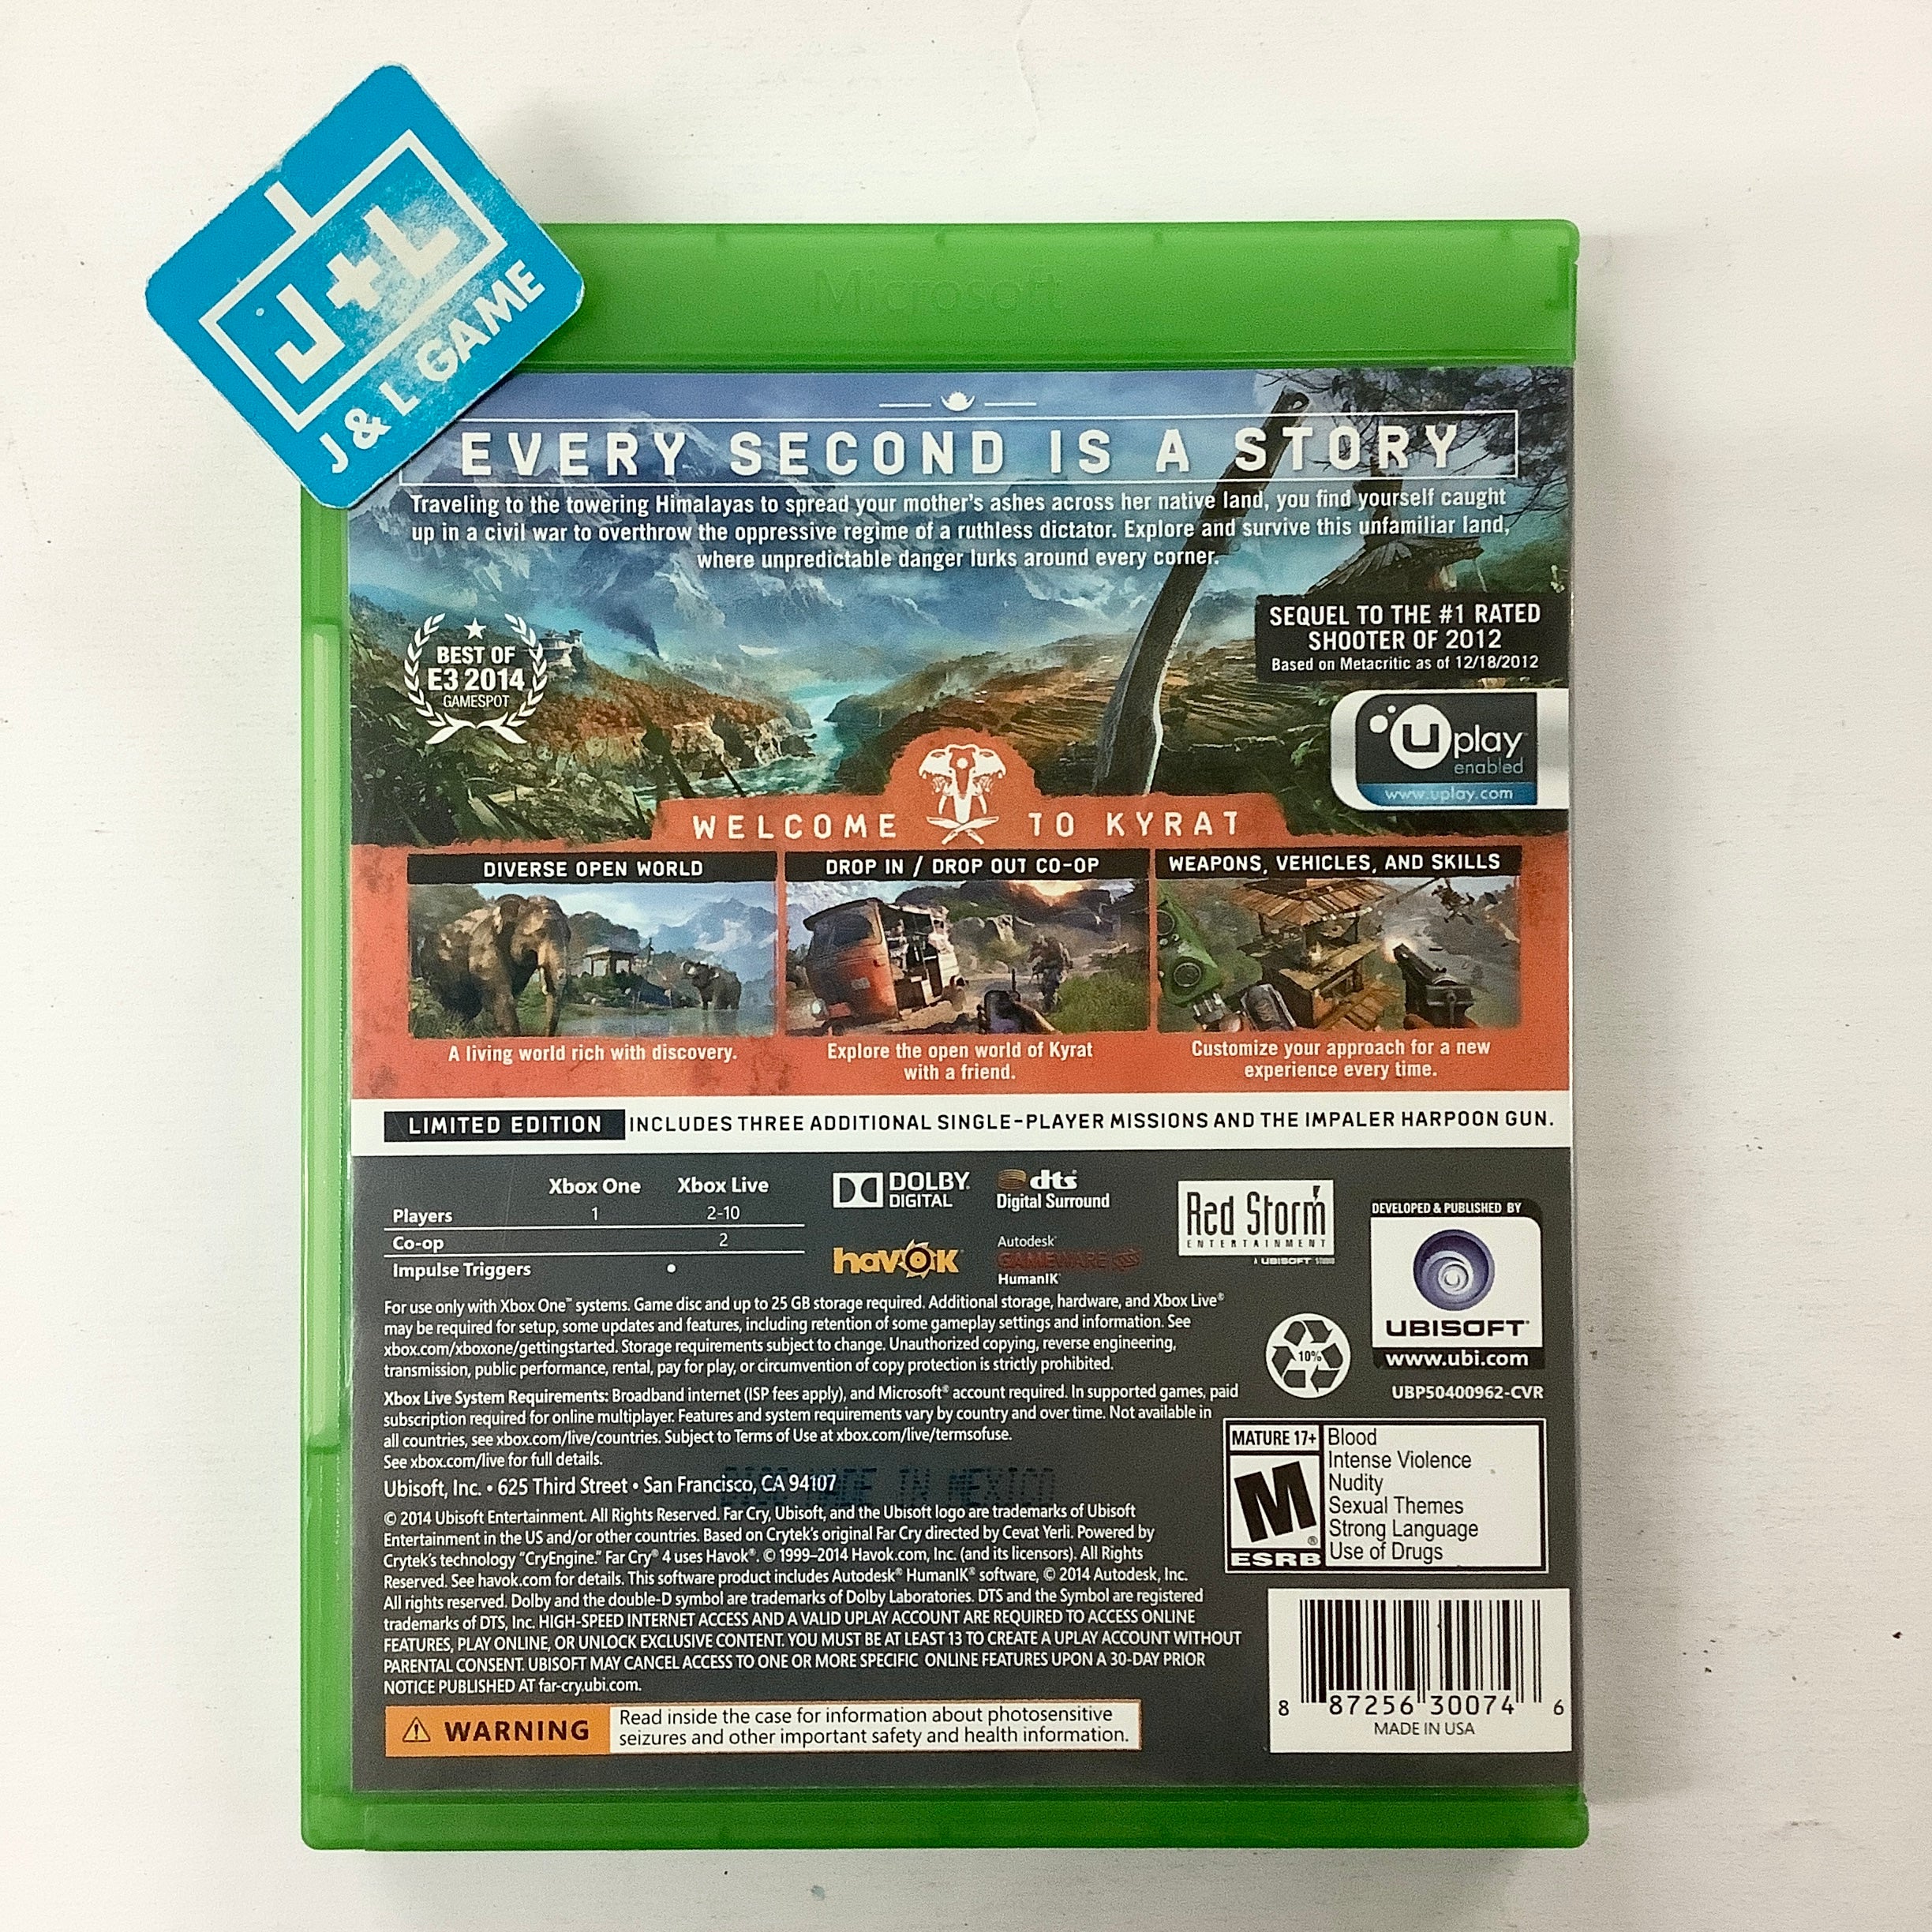 Far Cry 4 (Limited Edition) - (XB1) Xbox One [Pre-Owned] Video Games Ubisoft   